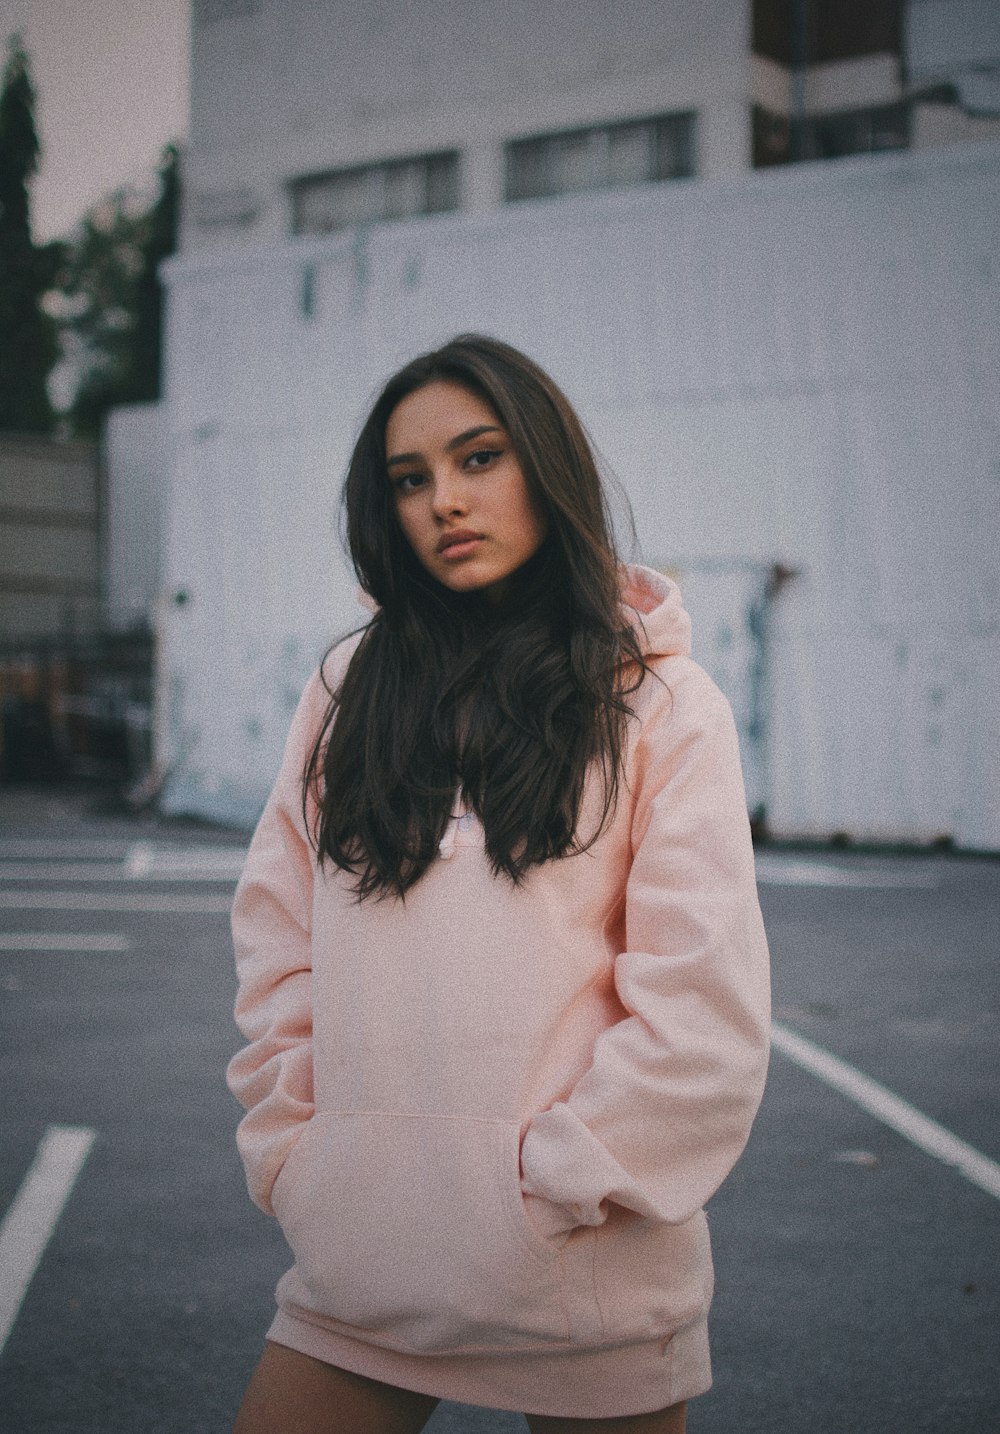 Hoodie Girl Pictures | Download Free Images on Unsplash